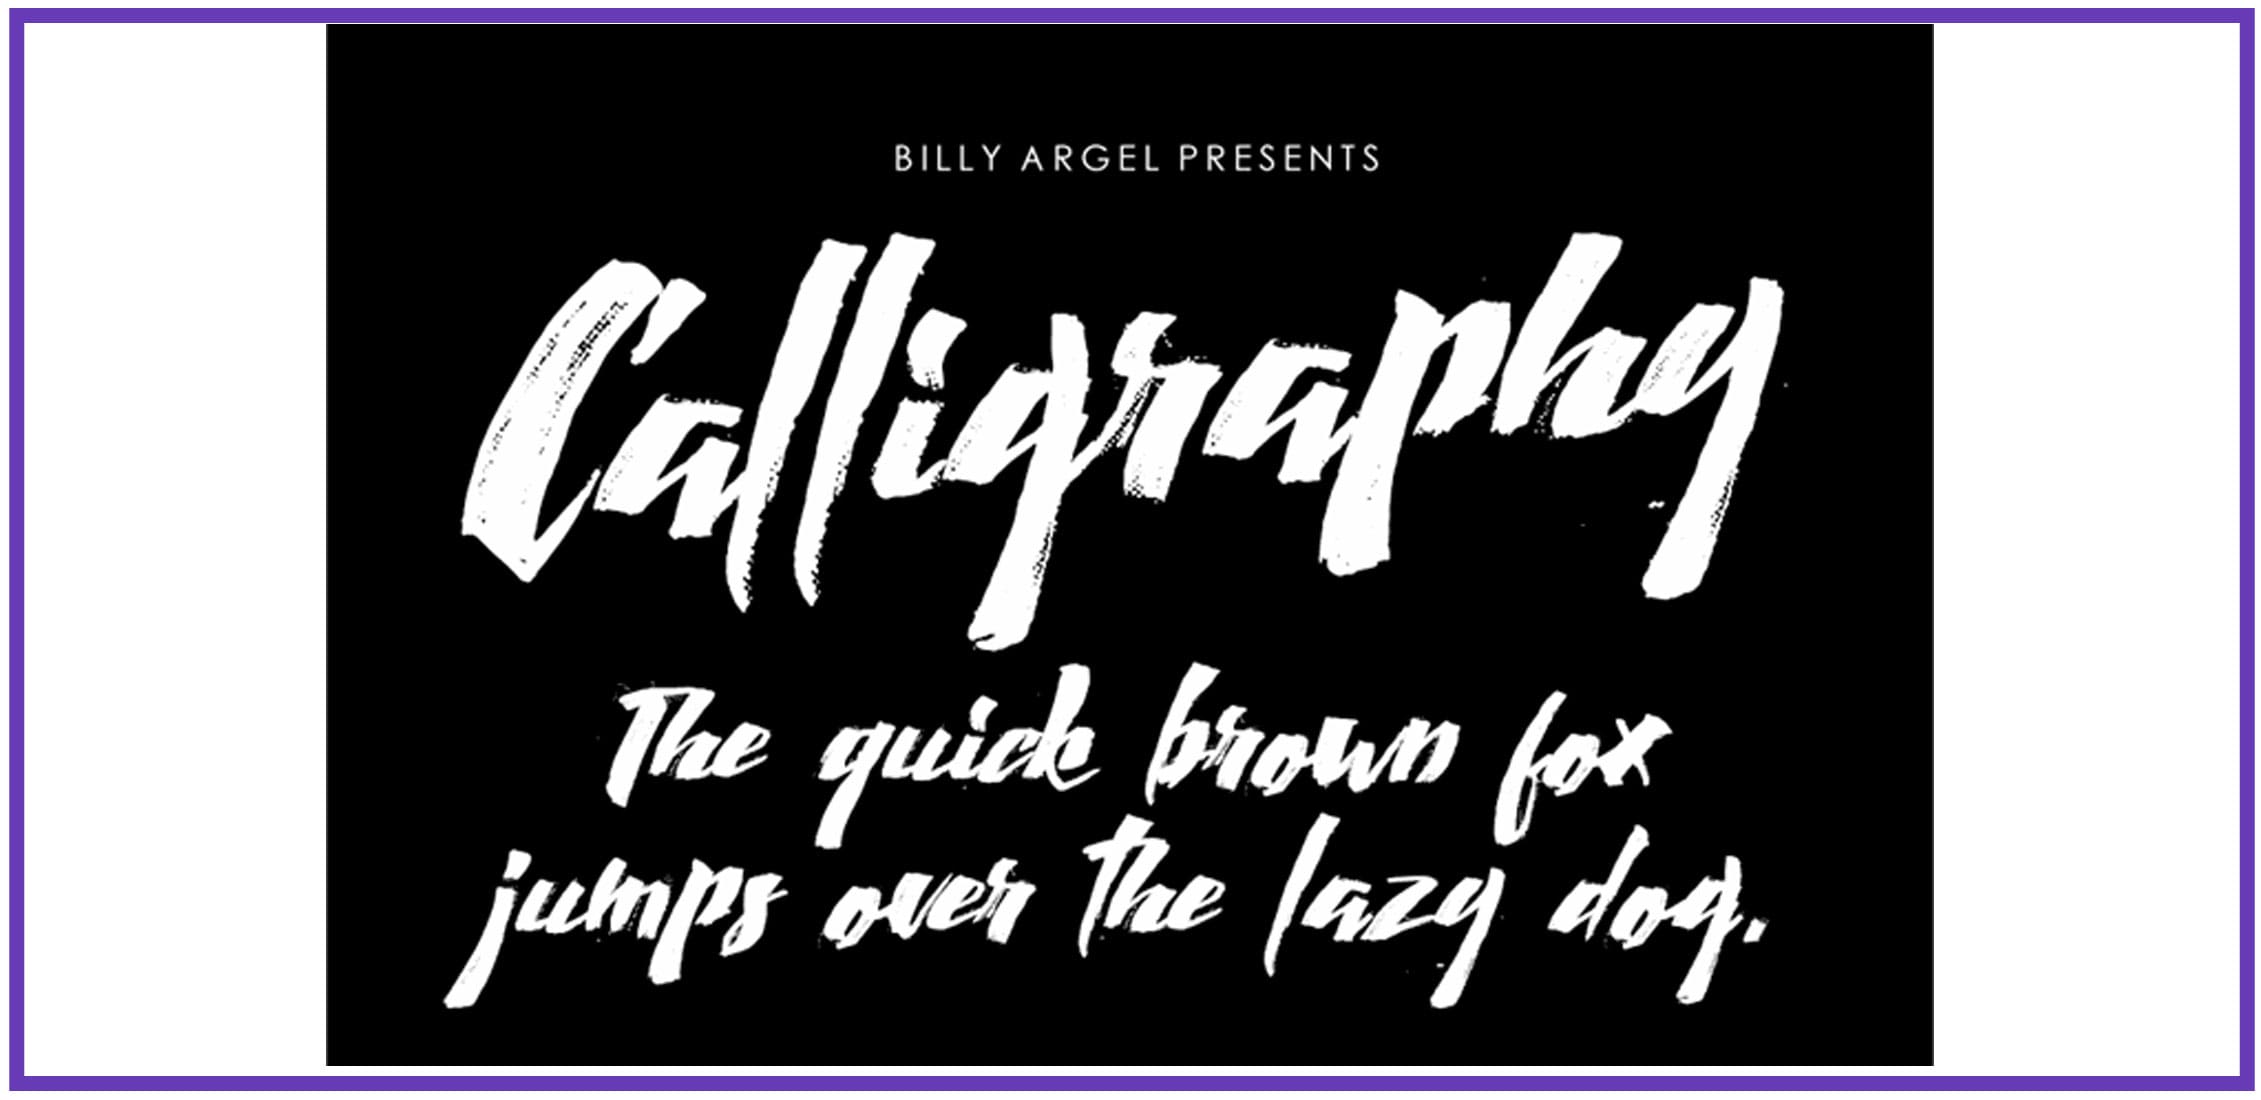 A calligraphic fun font on a black background.